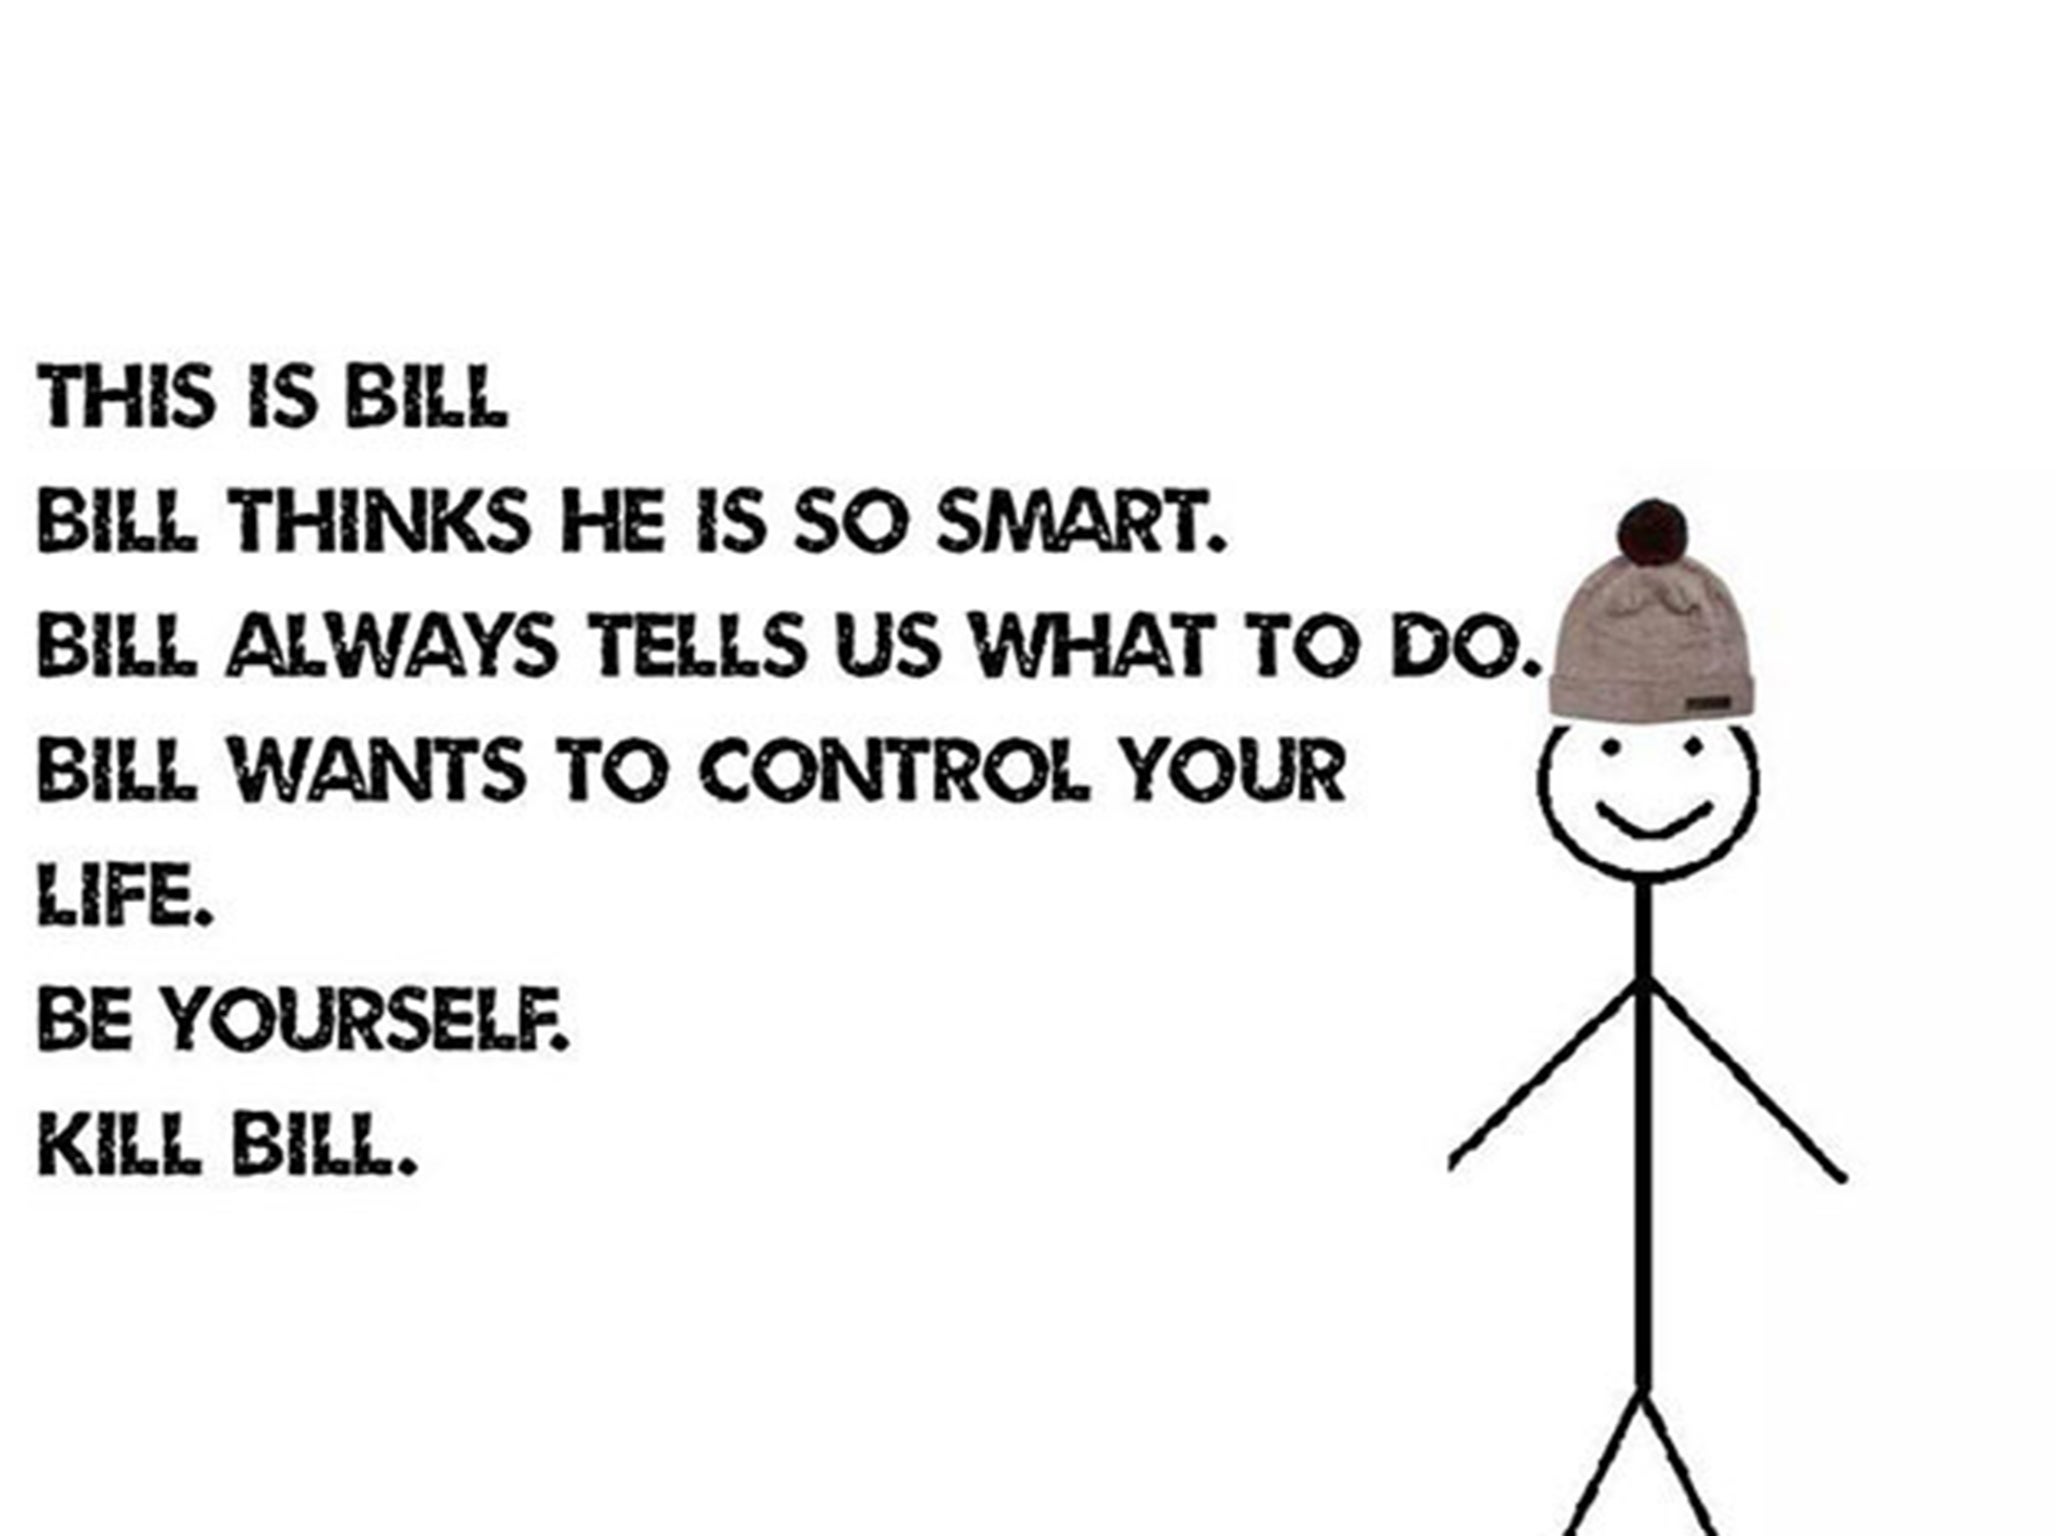 One of the many anti-'Be Like Bill' pictures now spreading around the internet